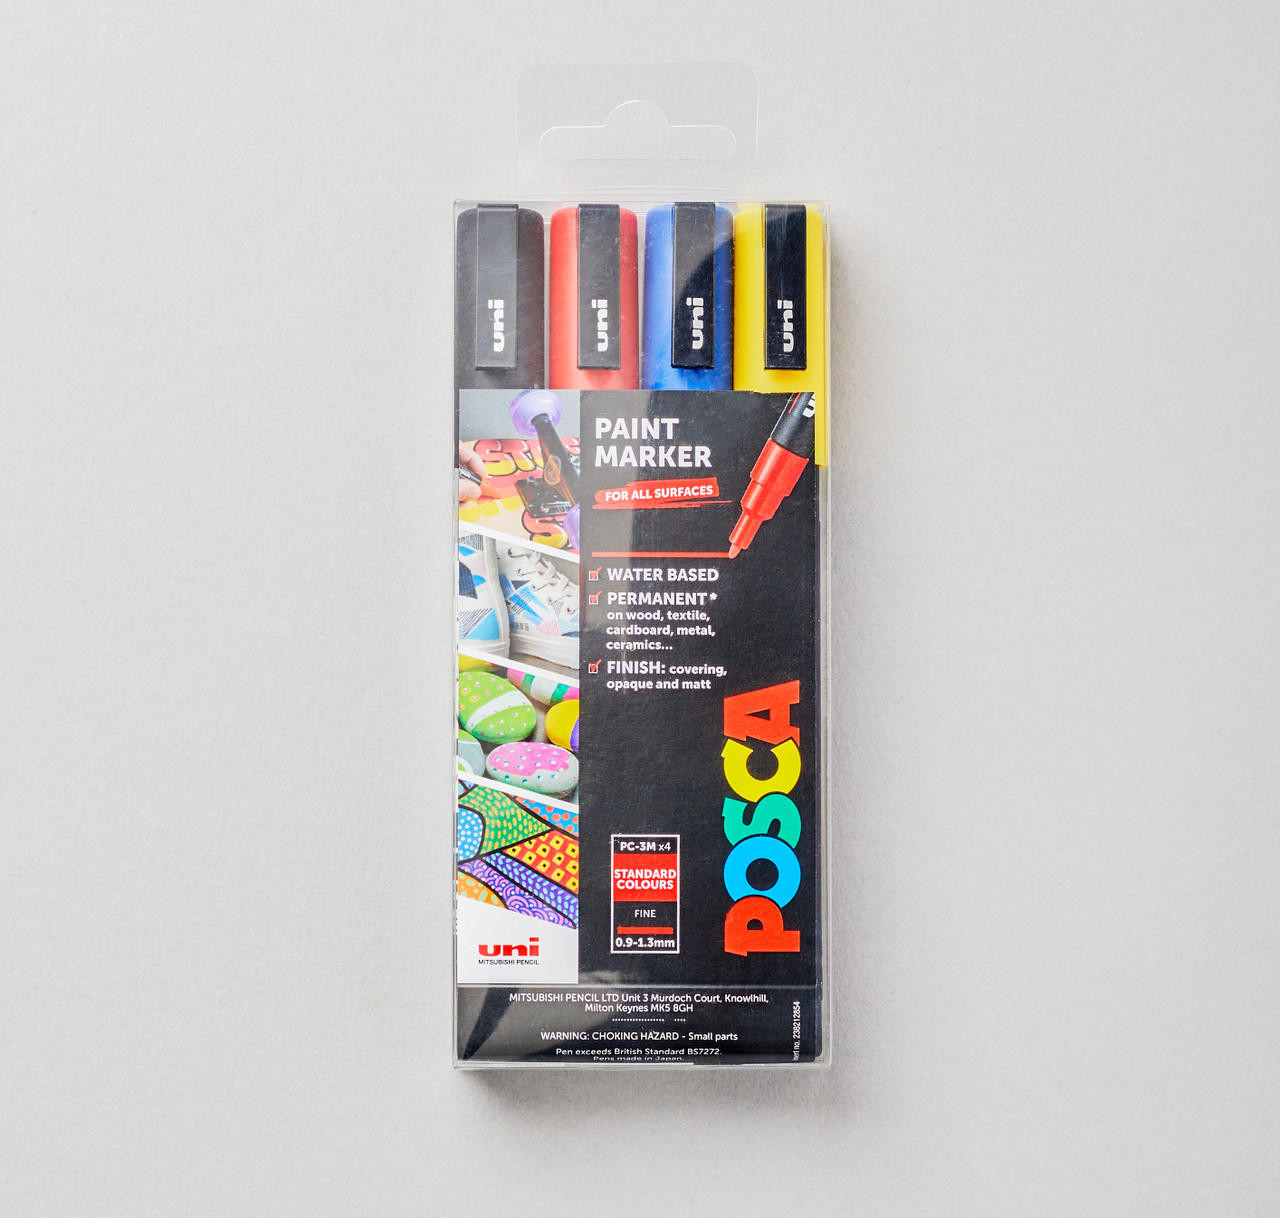 Uni POSCA PC-3M Paint Markers, Fine Point Marker Tips (0.9-1.3mm), Assorted  Ink, 8 Count